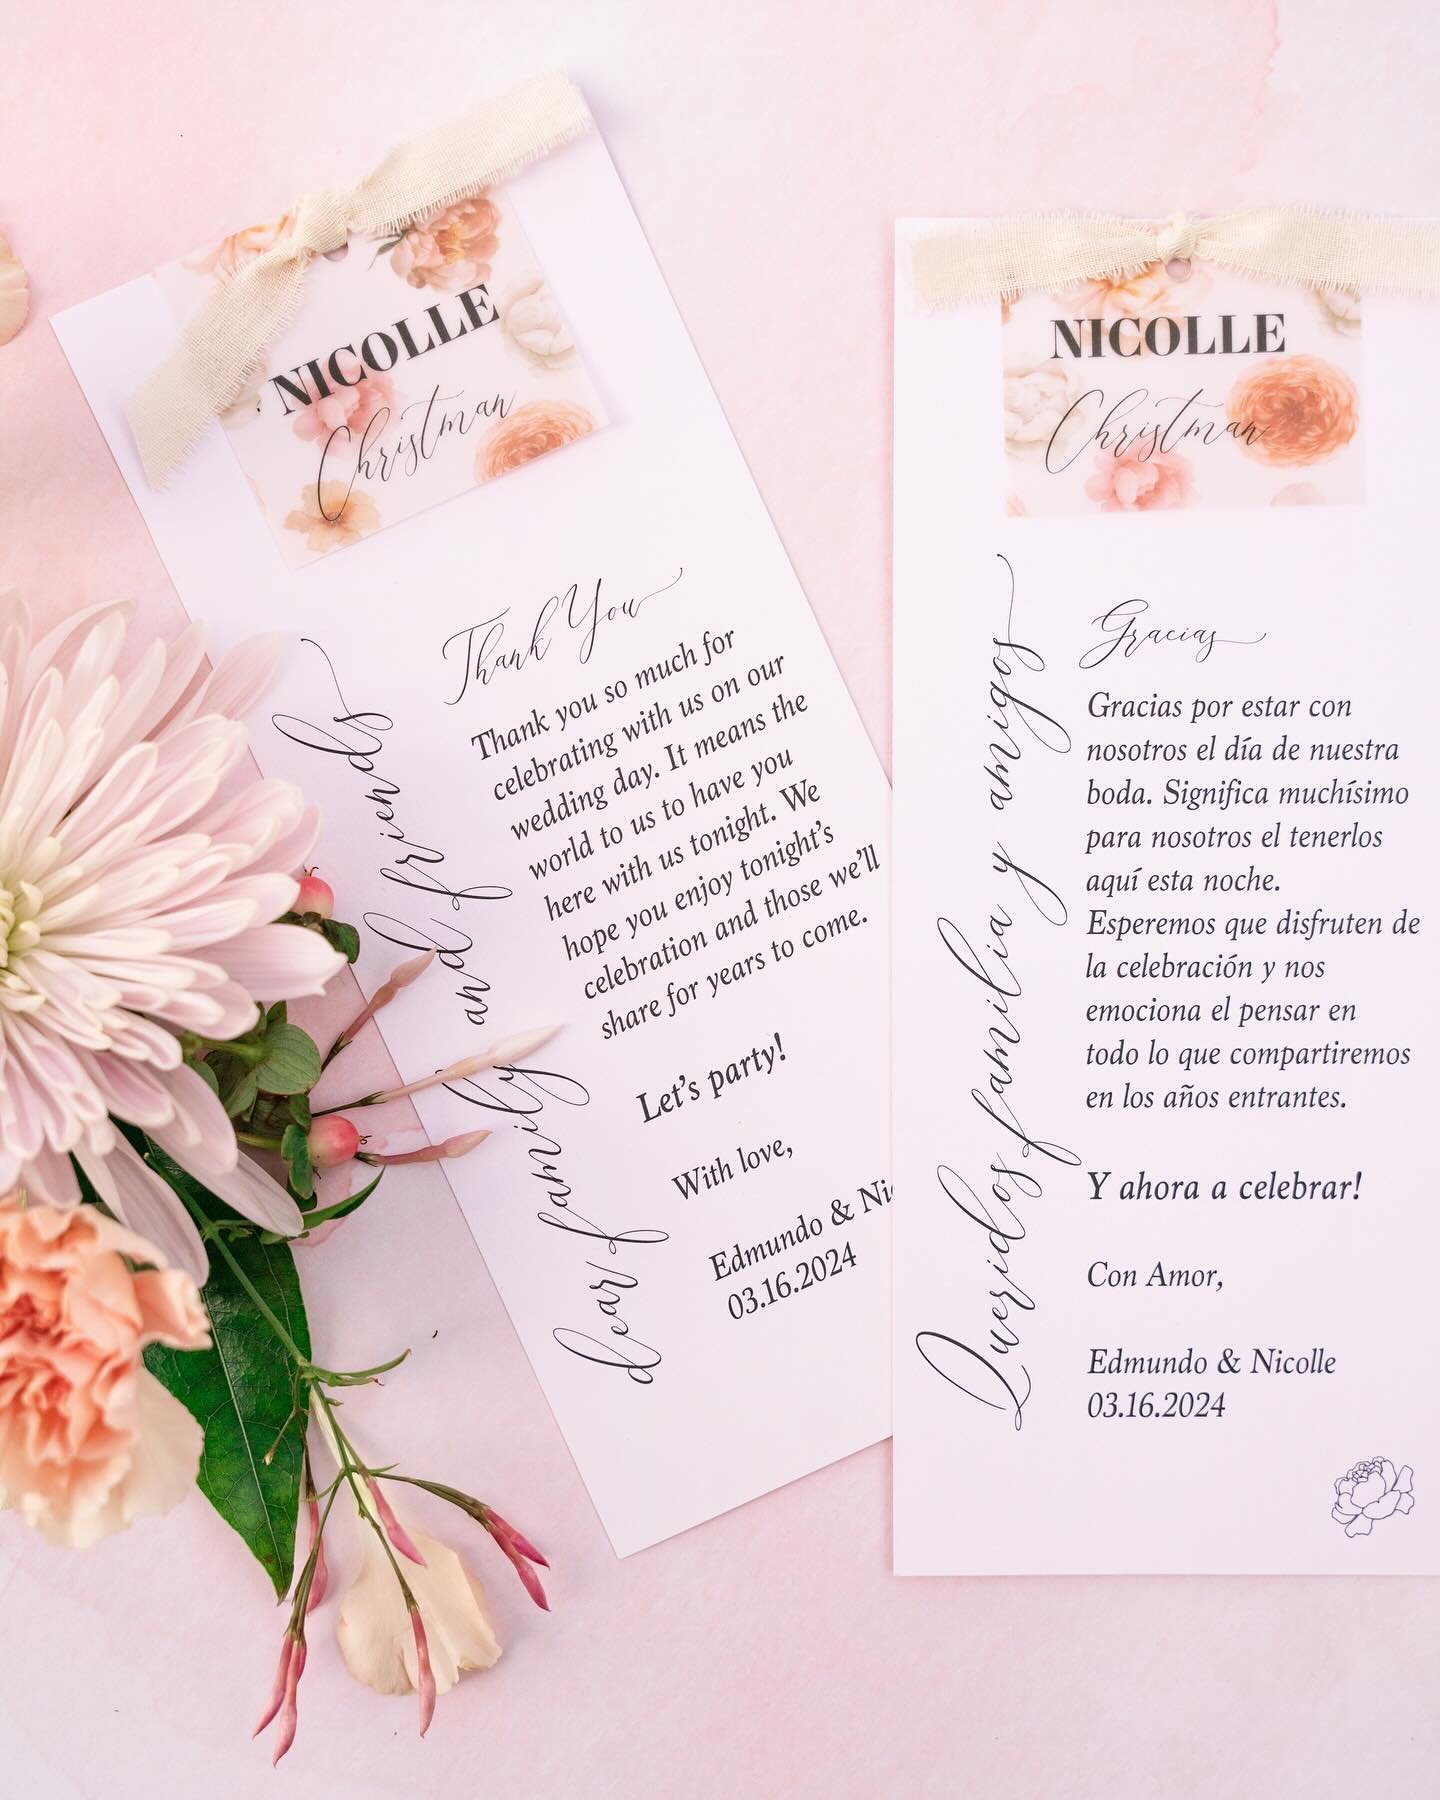 Even though love is a universal language, it was a joy (and fun challenge!) to offer day-of stationery in both English &amp; Spanish for this wedding. &iquest;Por qu&eacute; no los dos?

Sometimes the little details are what truly tell your love stor